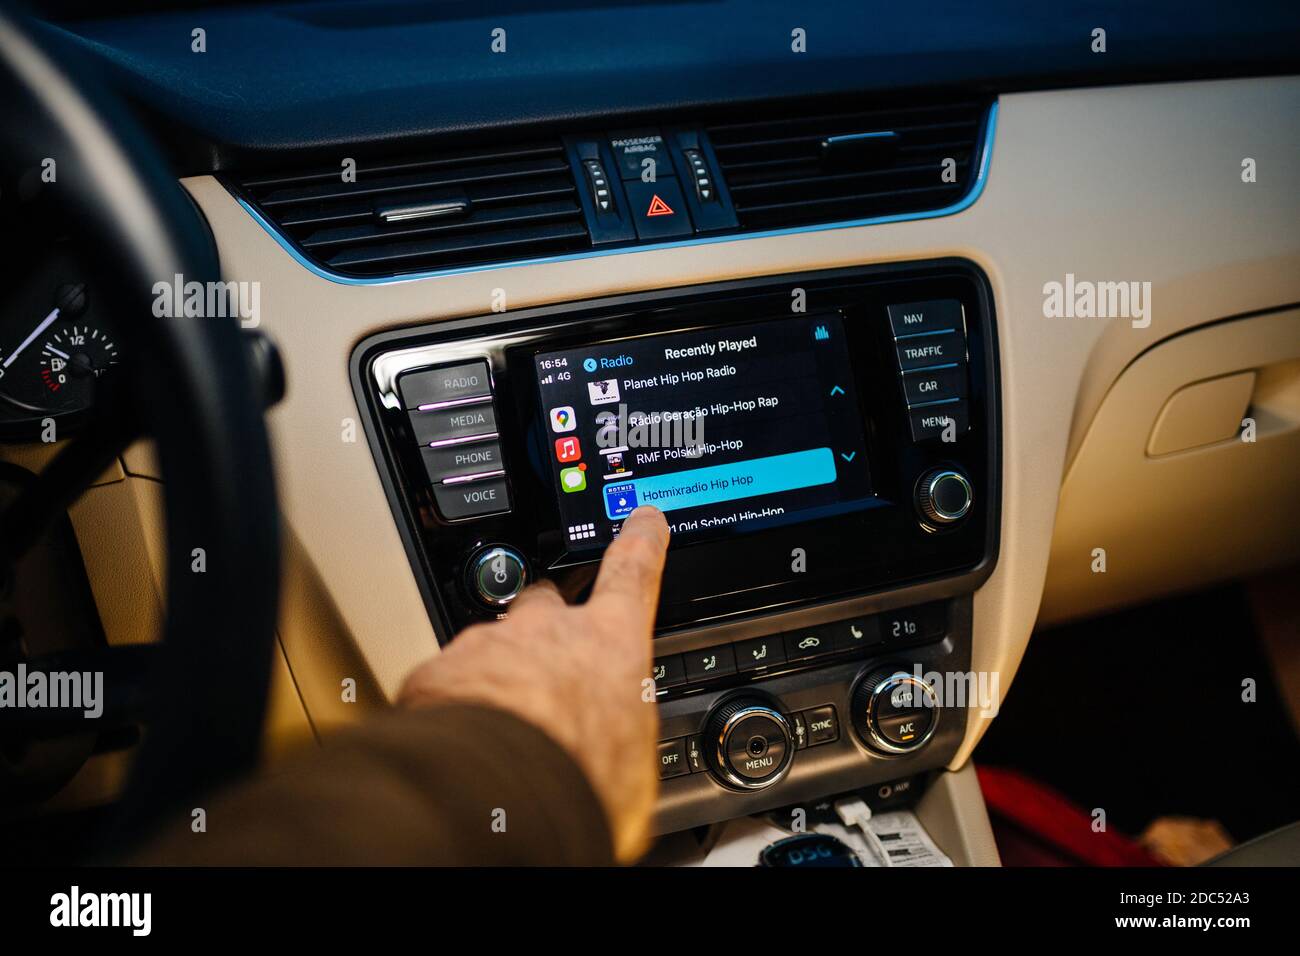 Paris, France - Nov 11, 2020: Personal perspective POV of male hand  touching the infotainment car computer system running Apple Computers  CarPlay playing Hot Mix Radio Hip-Hop on Apple Music Stock Photo - Alamy